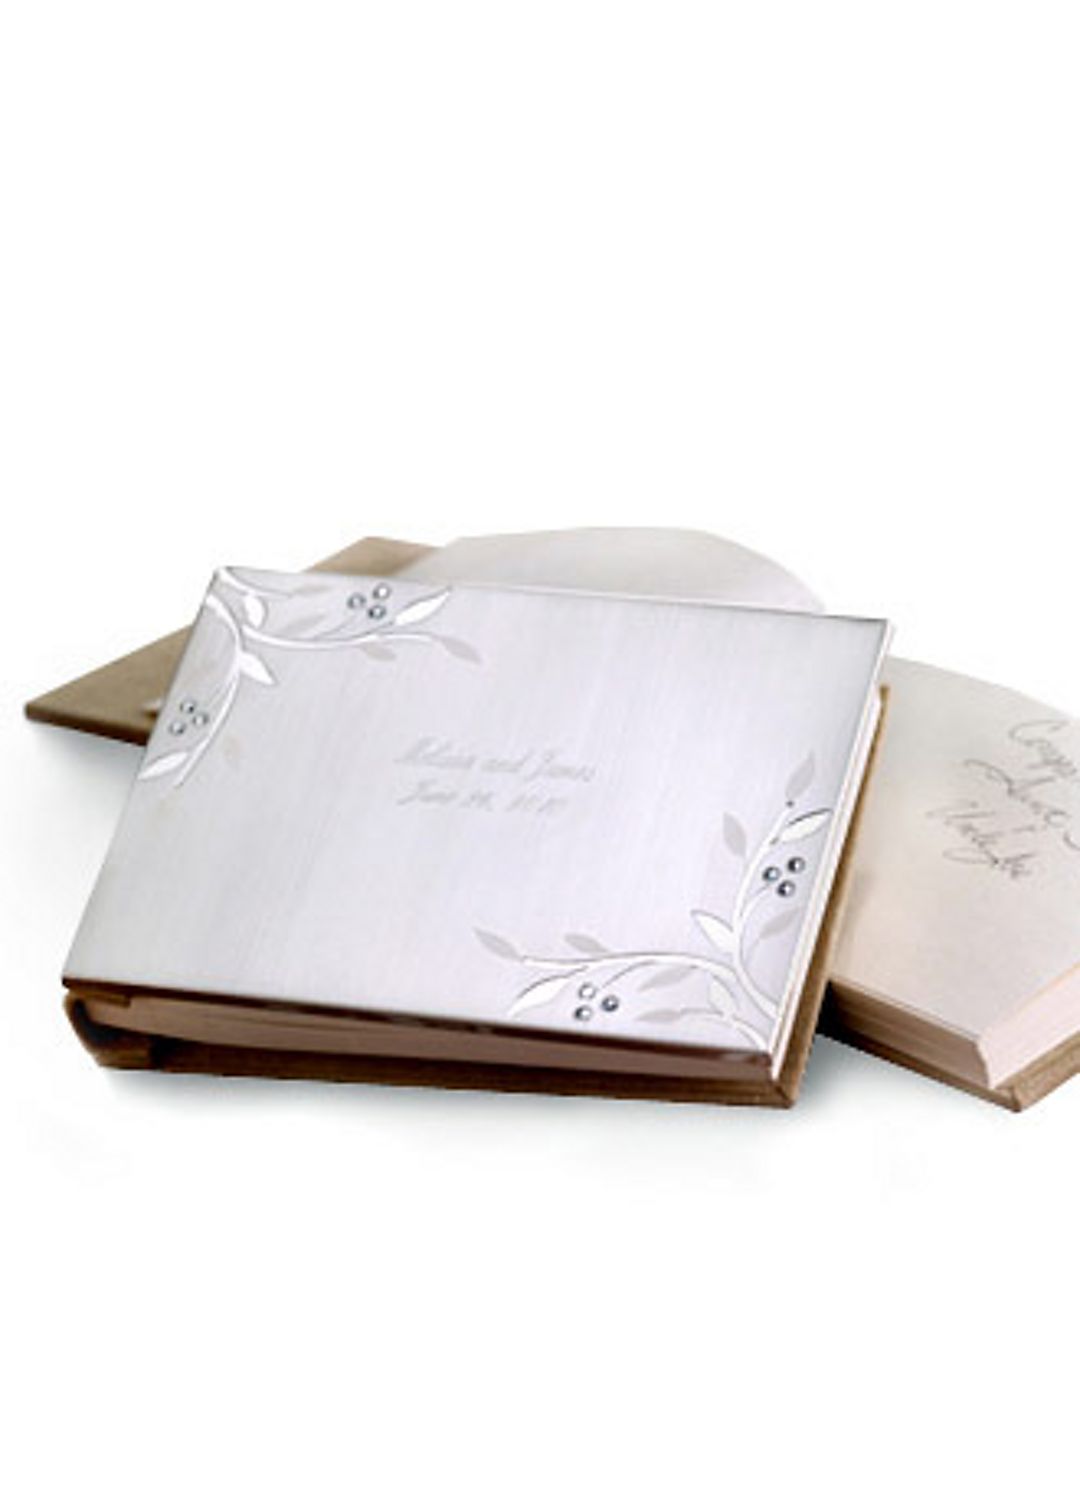 Personalized Nature's Love Guest Book Image 1